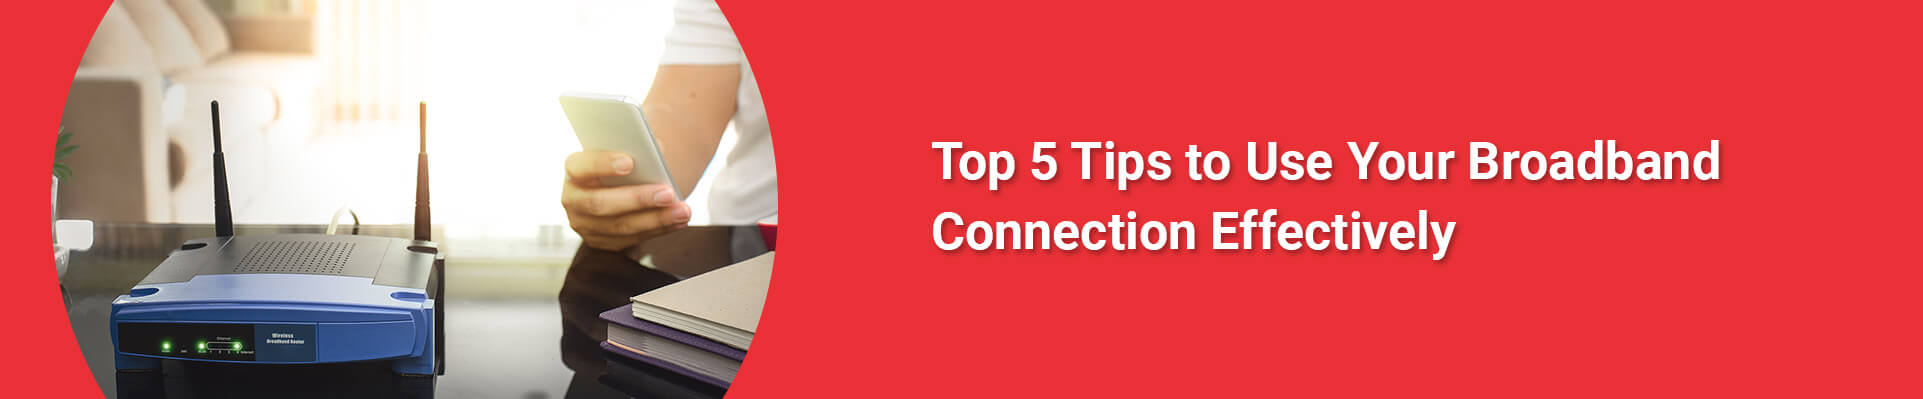 Top 5 Tips to Use Your Broadband Connection Effectively